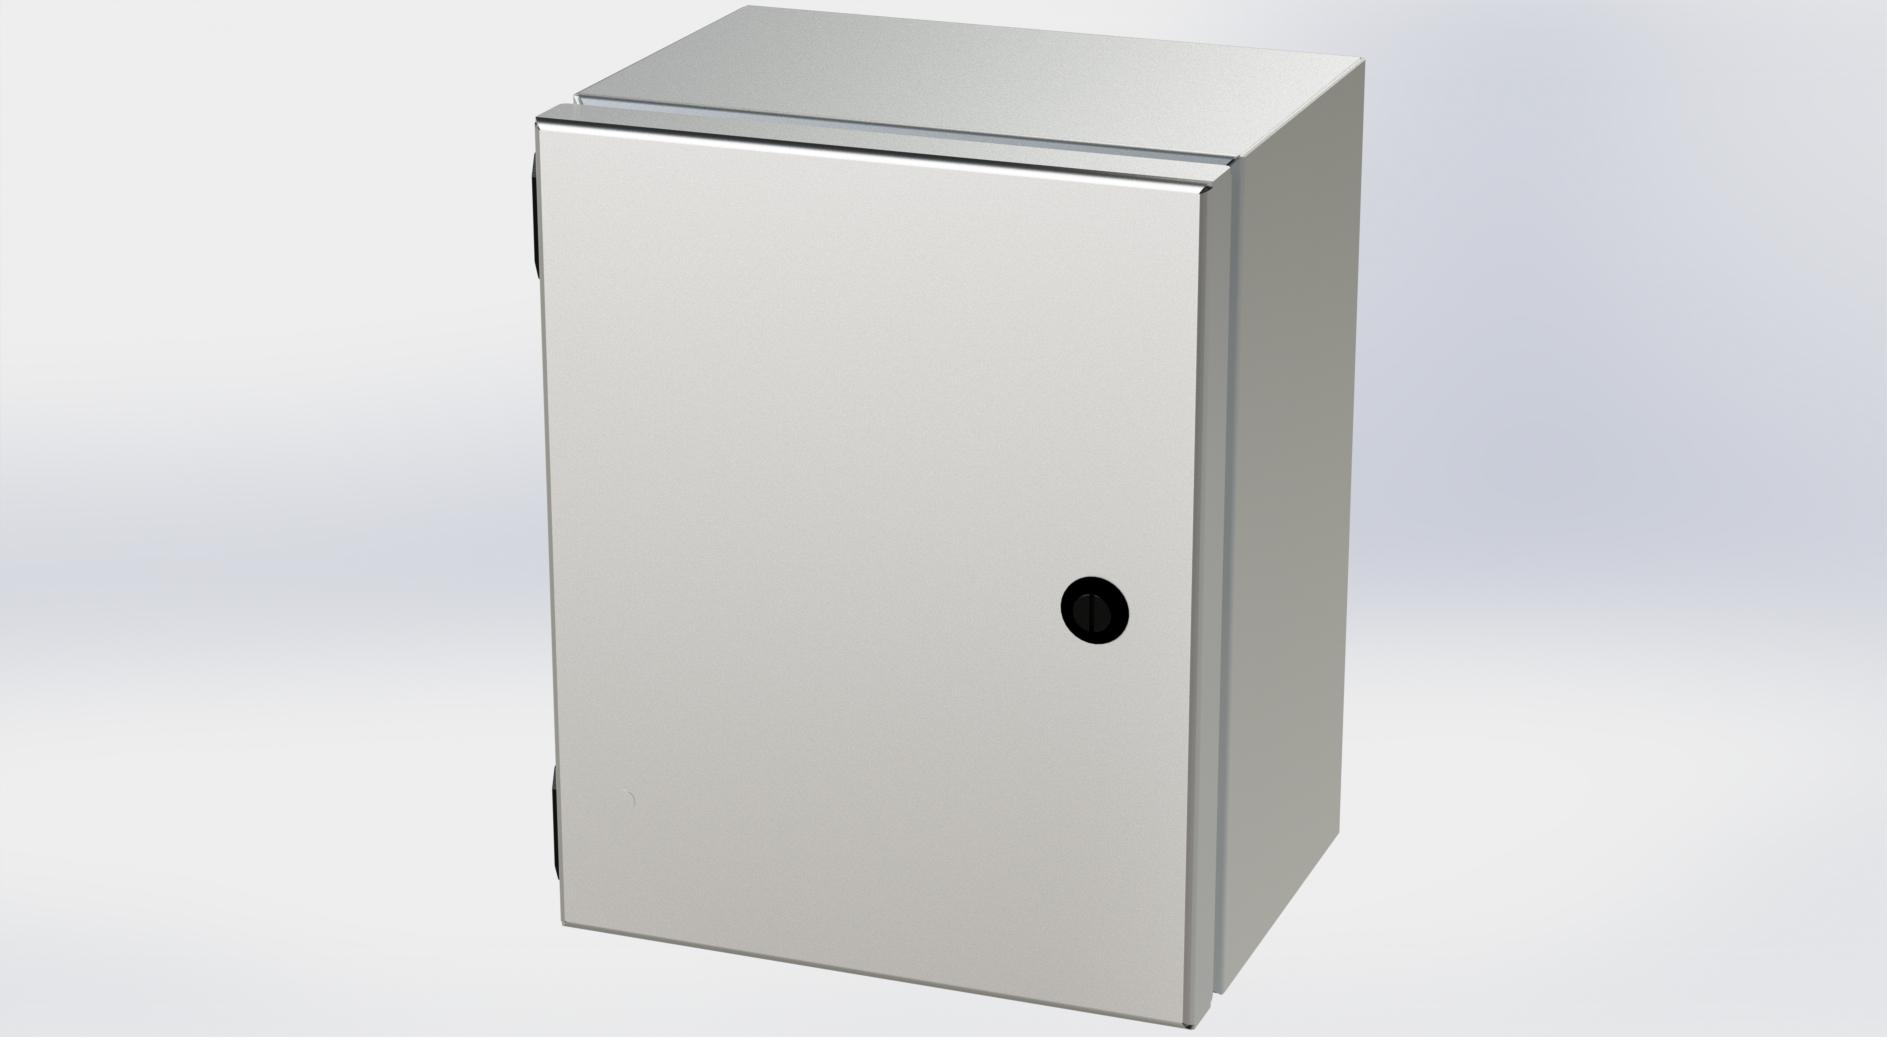 Saginaw Control SCE-10086ELJSS6 S.S. ELJ Enclosure, Height:10.00", Width:8.00", Depth:6.00", #4 brushed finish on all exterior surfaces. Optional sub-panels are powder coated white.